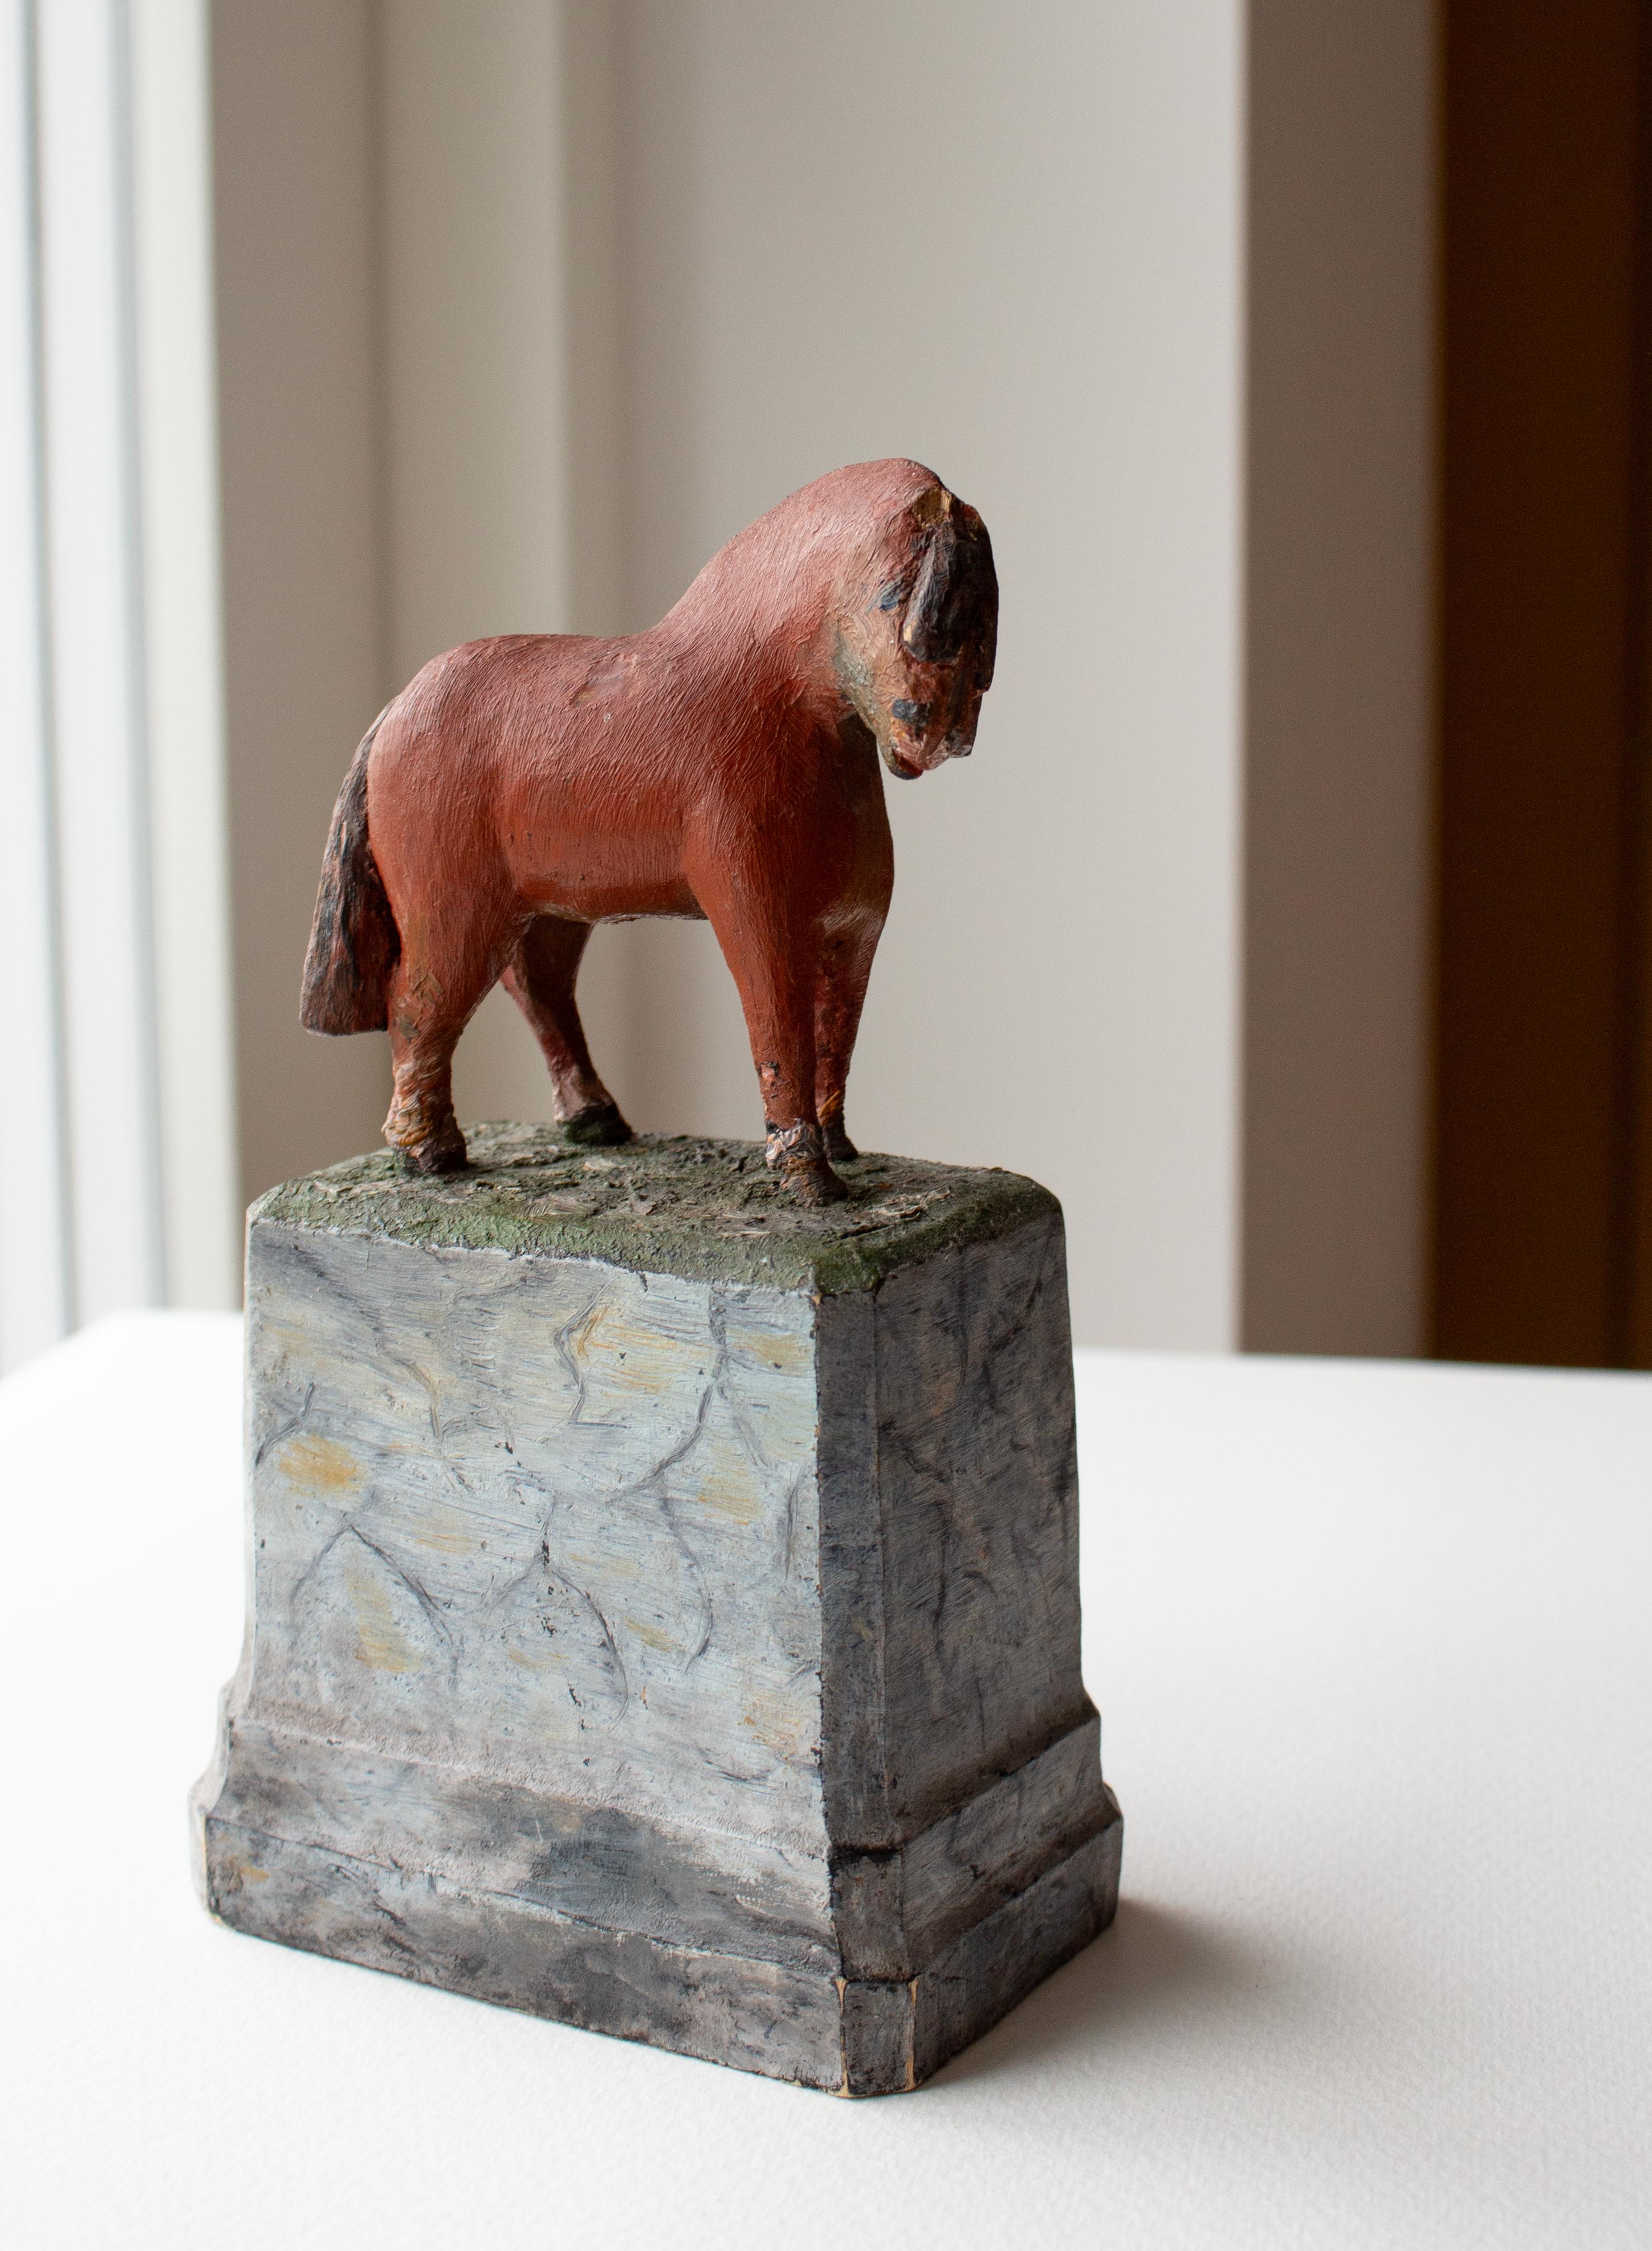 A peasant sculpture in the form of a small working, red-painted horse with a bushy mane and tail on a painted pedestal, beautifully carved and painted wood. 
On the underside, a text in pencil: Memory of Harald (probably the horse's name)